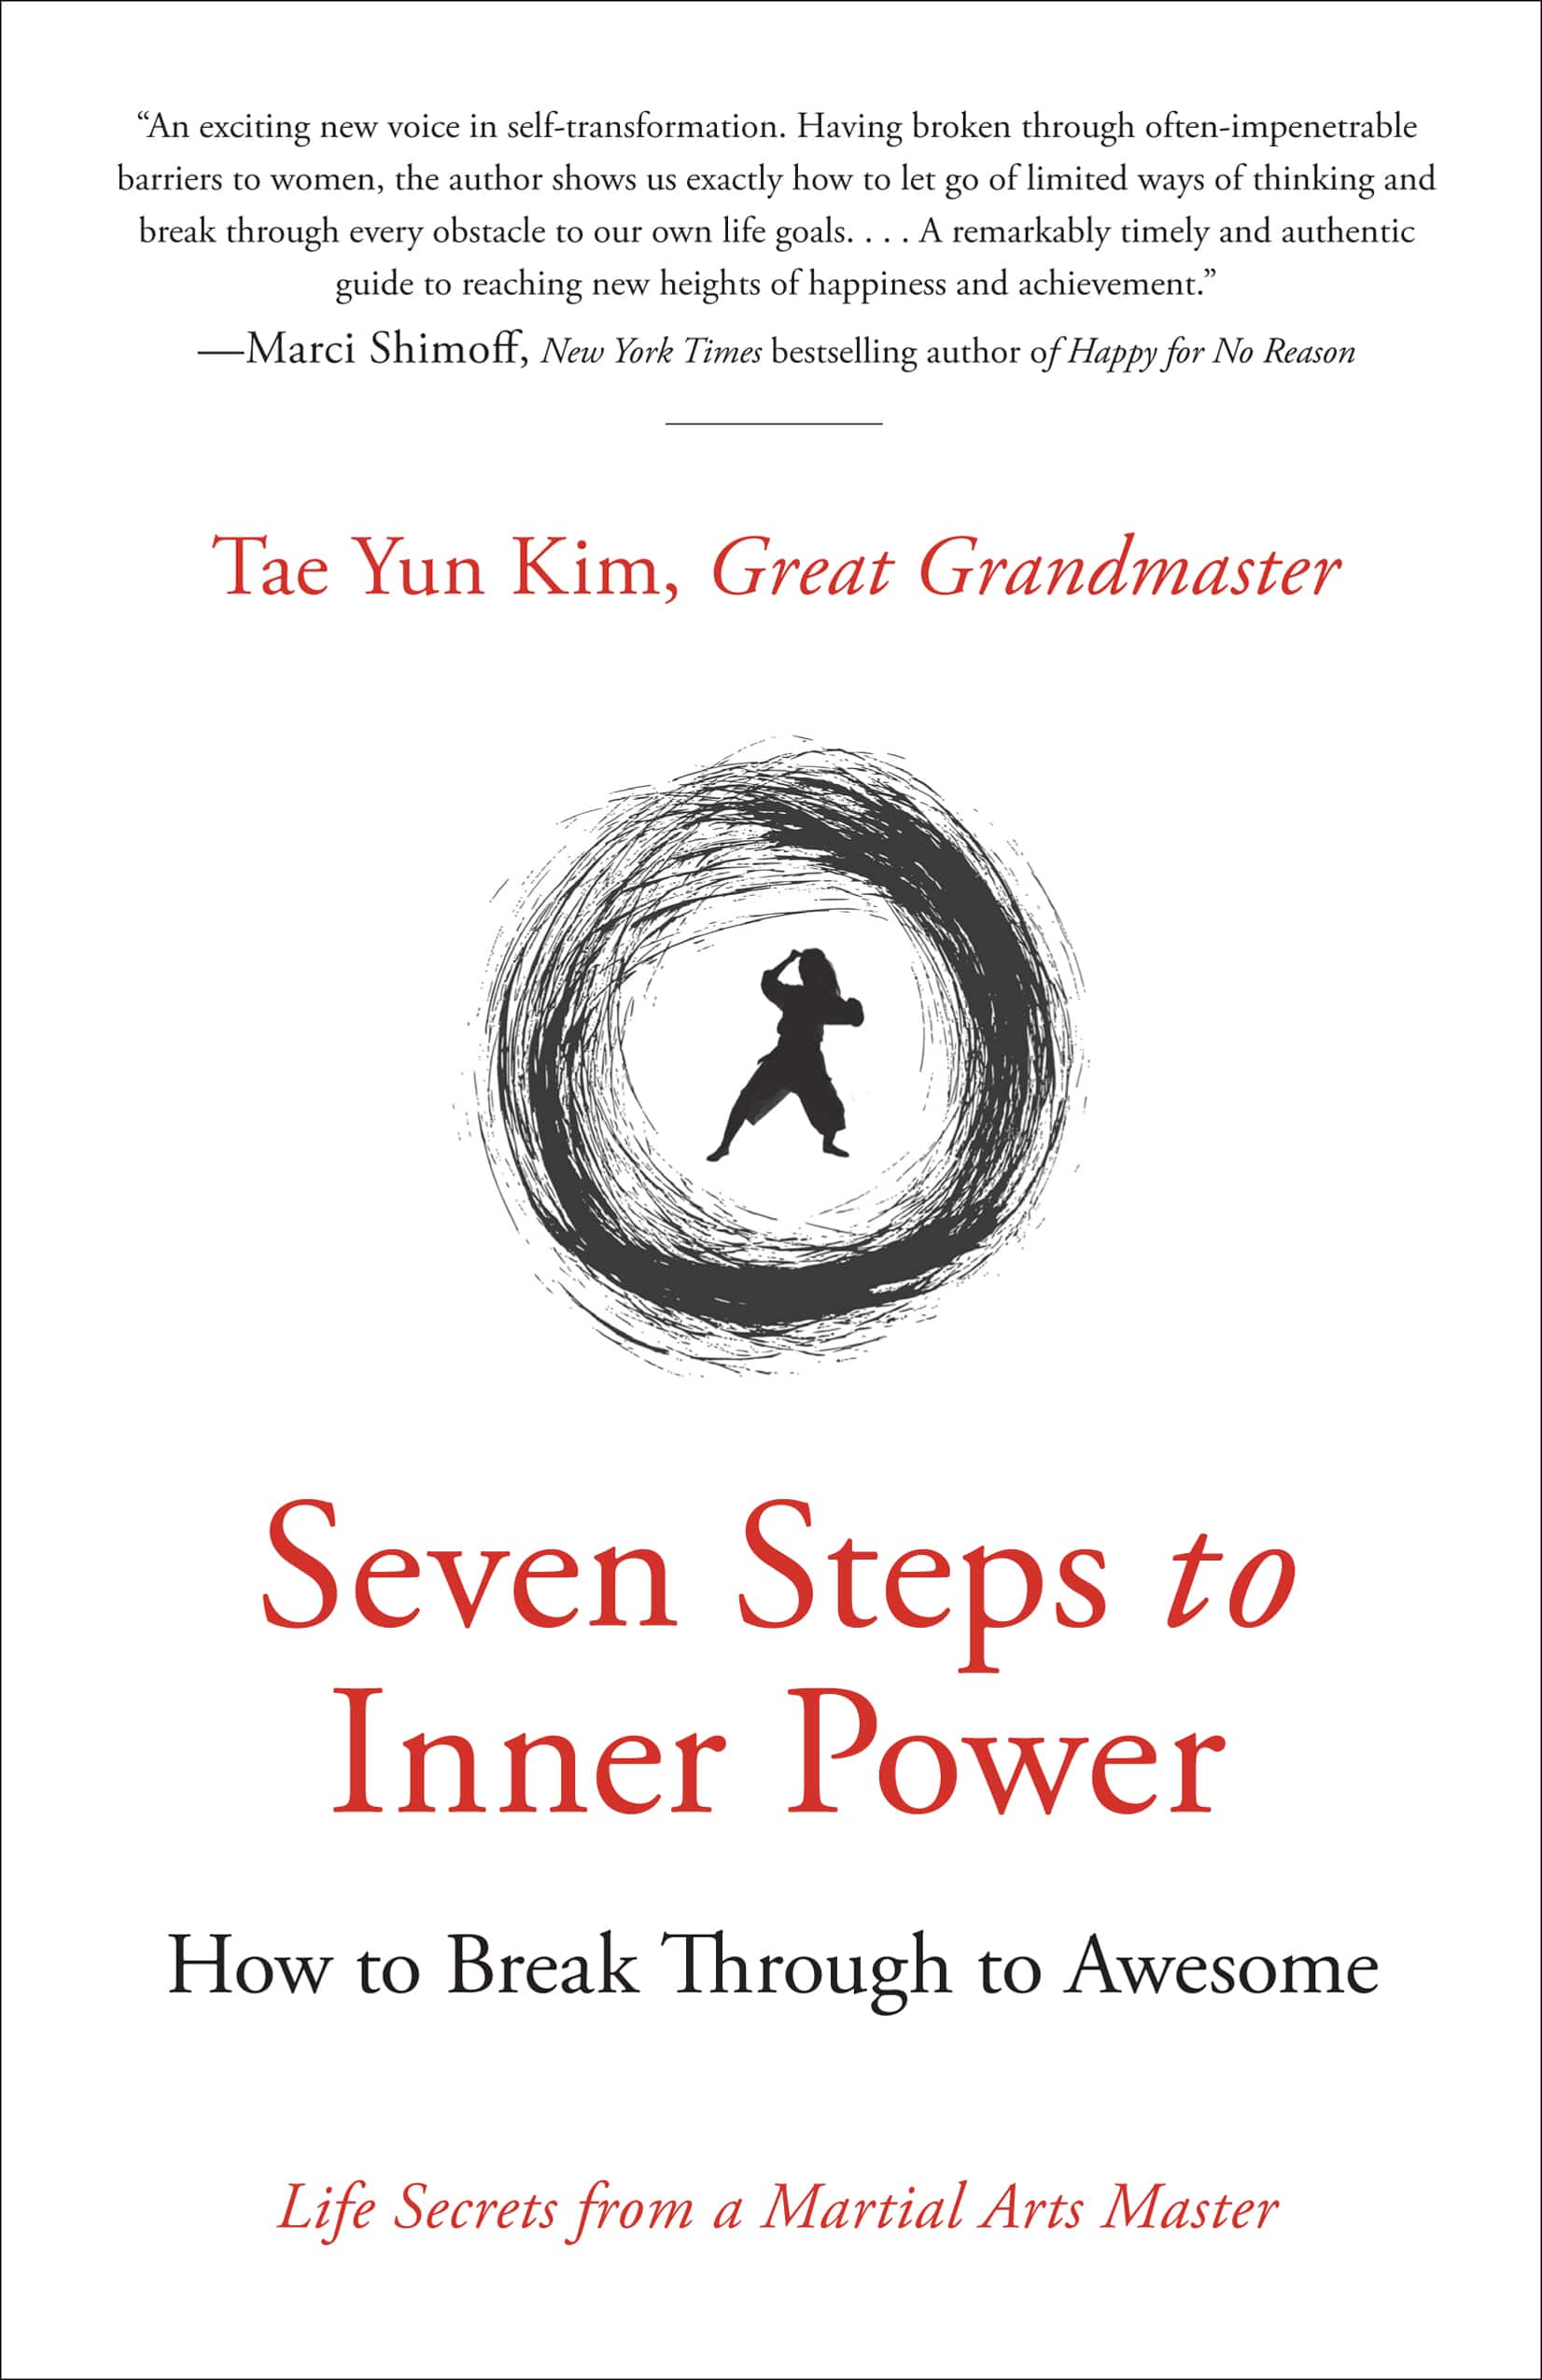 Seven Steps to Inner Power Book by Tae Yun Kim